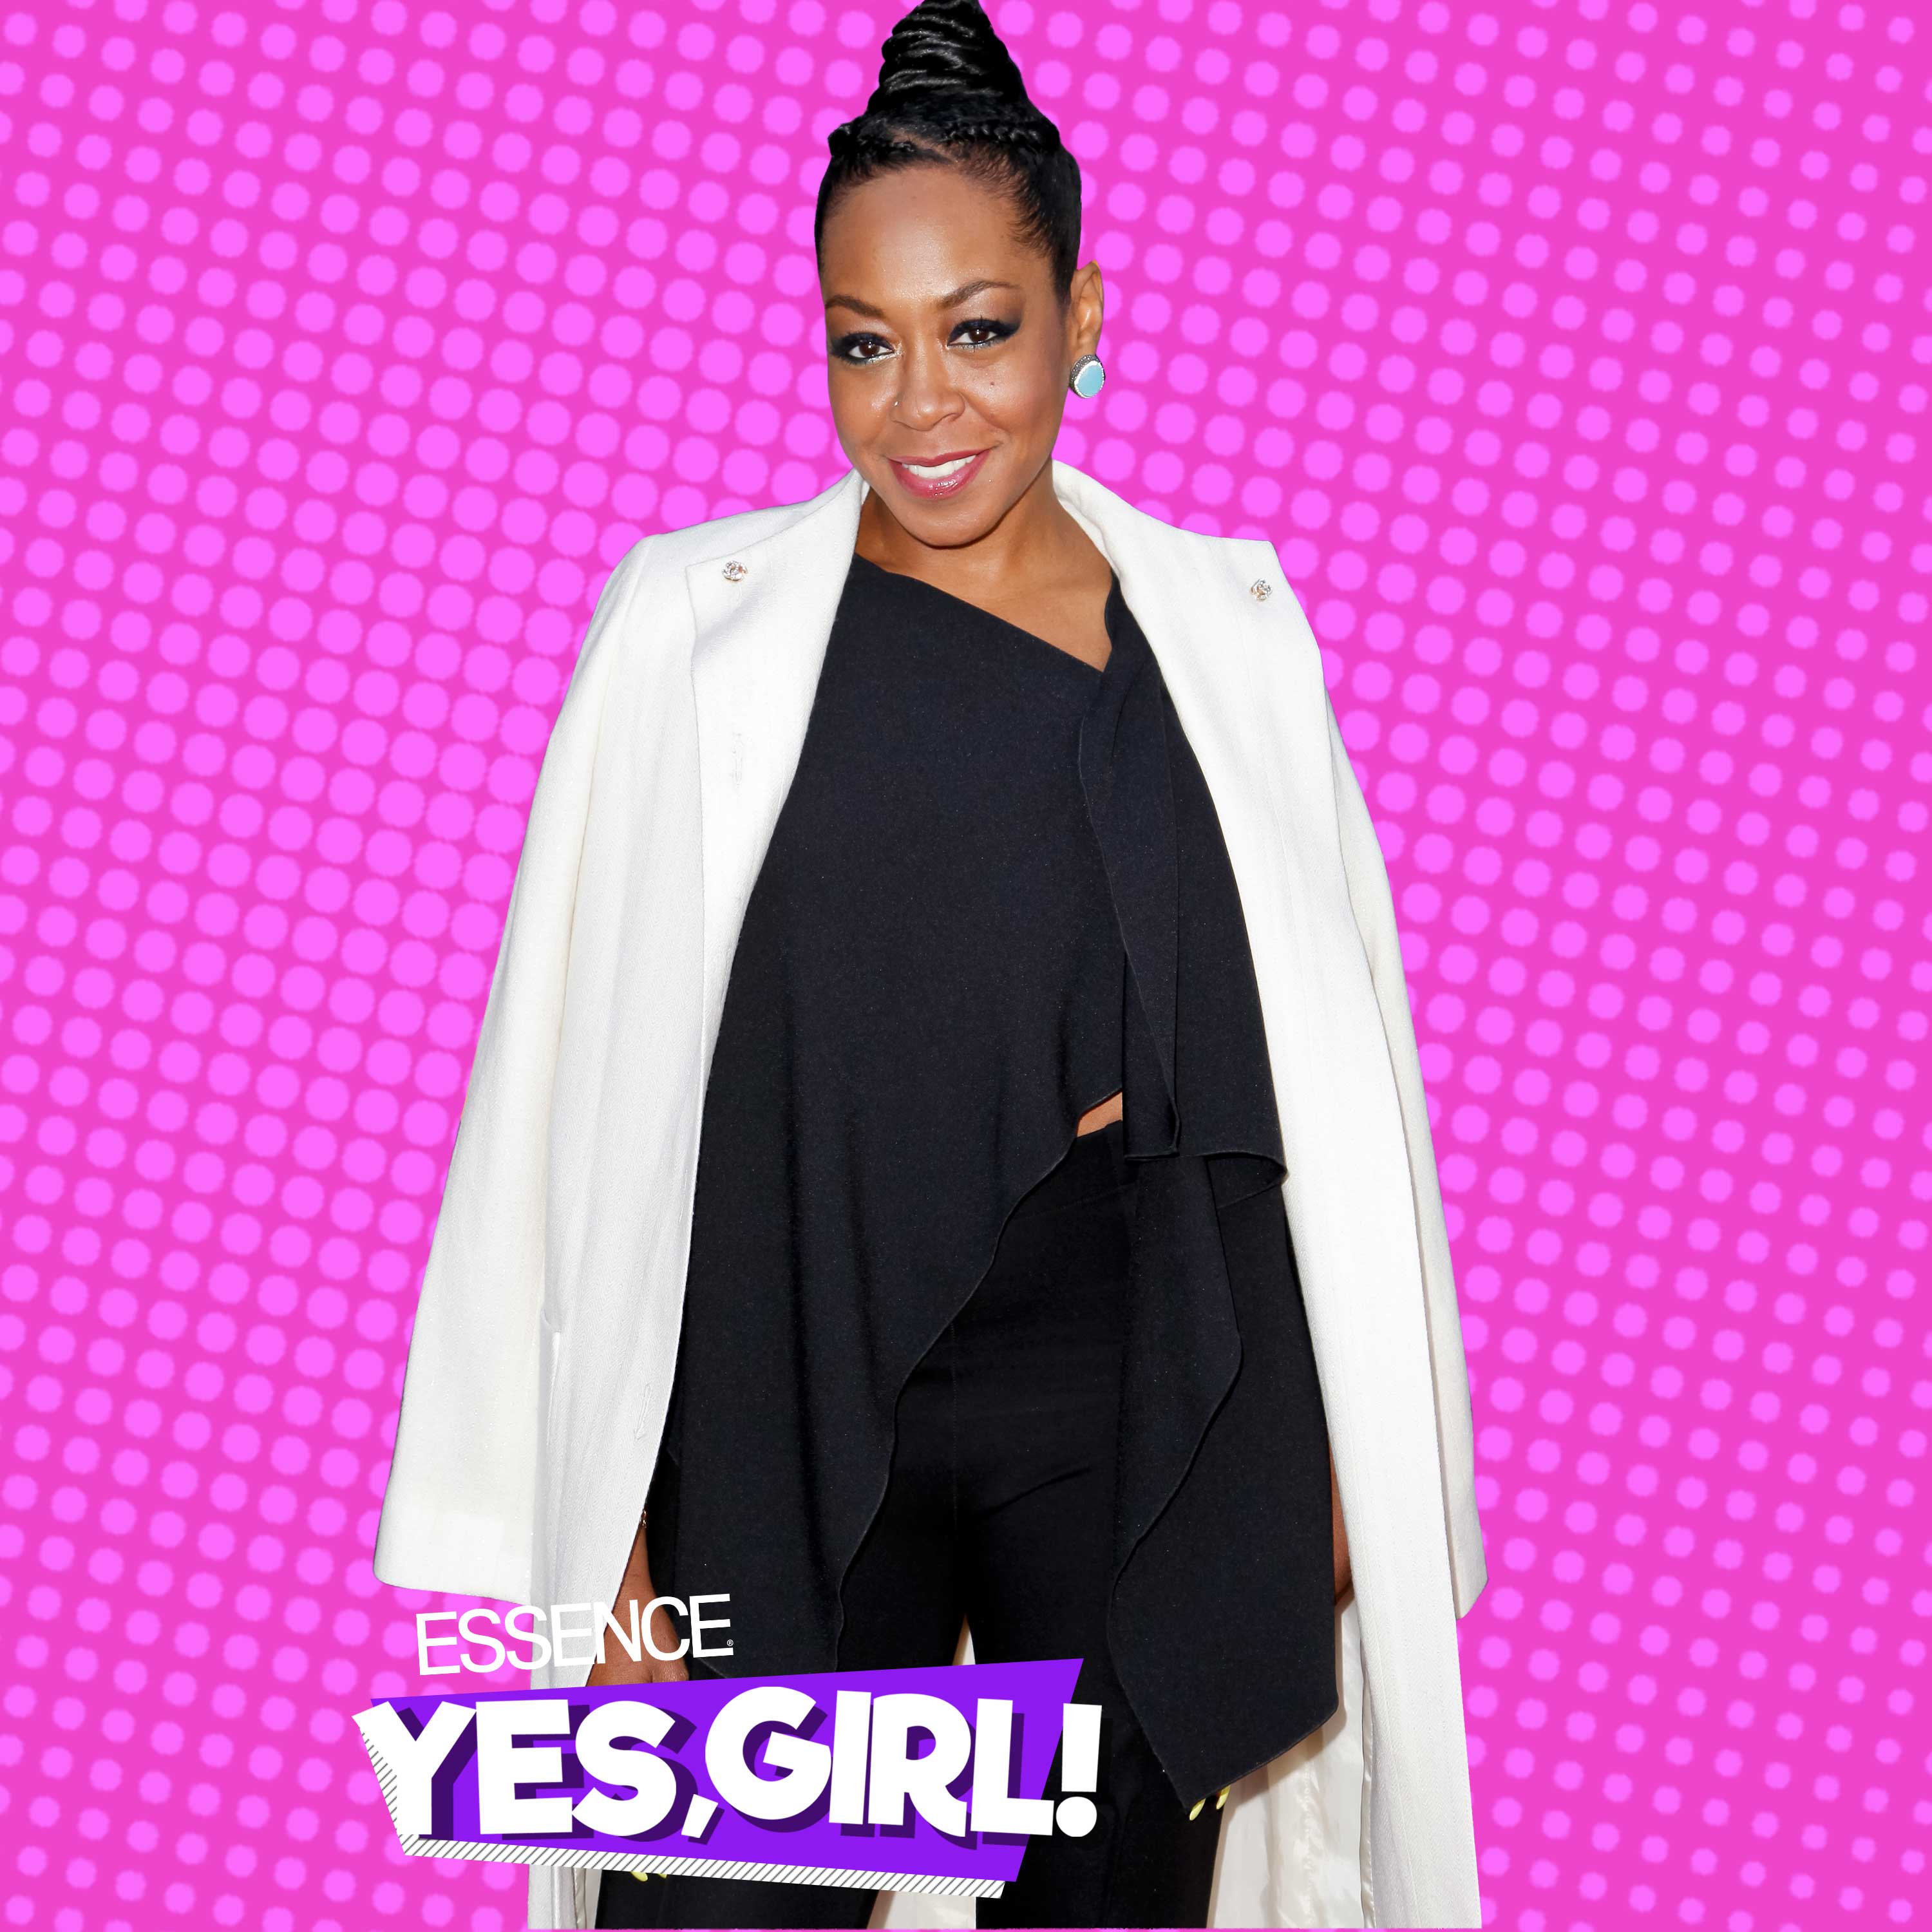 Tichina Arnold On Dating After Divorce: 'I Live My Life Trying Not To Make the Same Mistake Twice'
